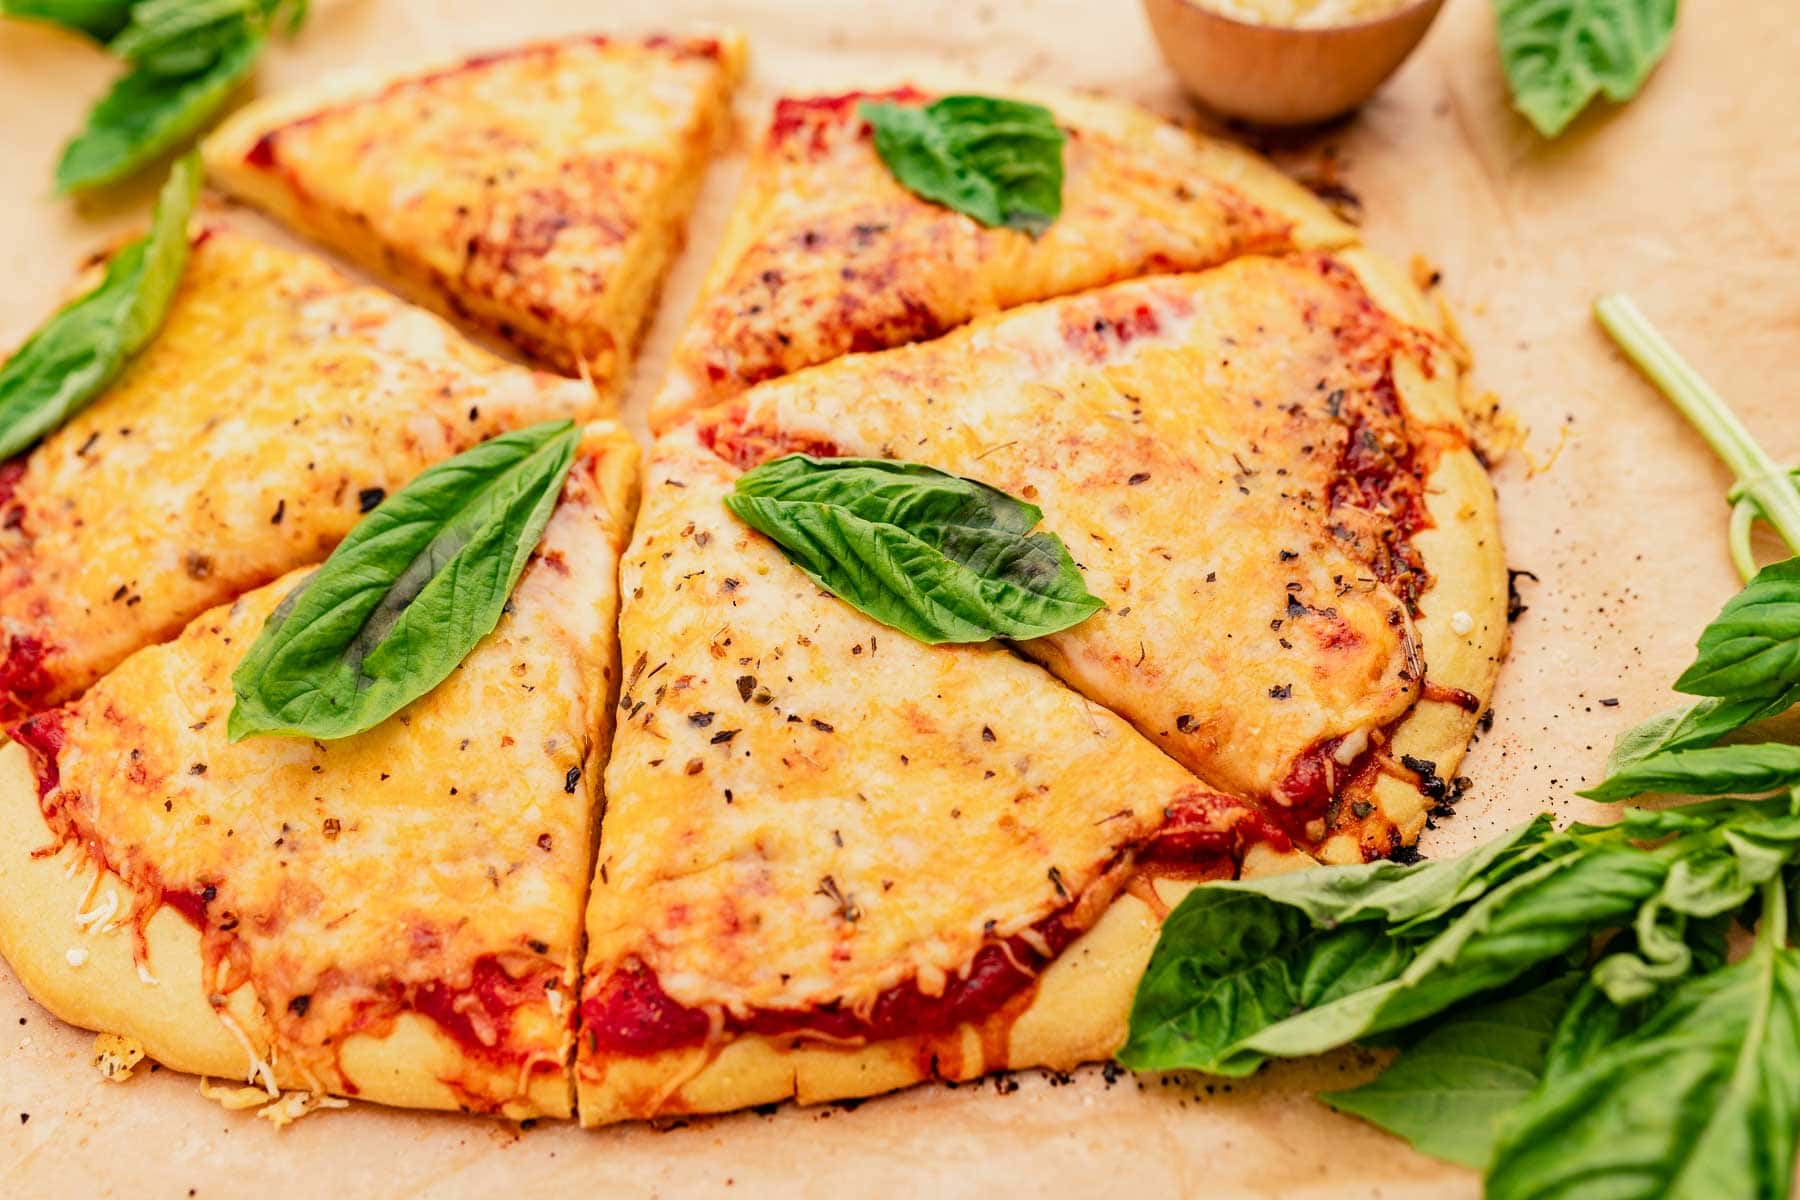 Sliced cheese pizza with a chickpea flour crust garnished with fresh basil leaves on a light surface, with whole basil leaves and a small bowl of sauce nearby.